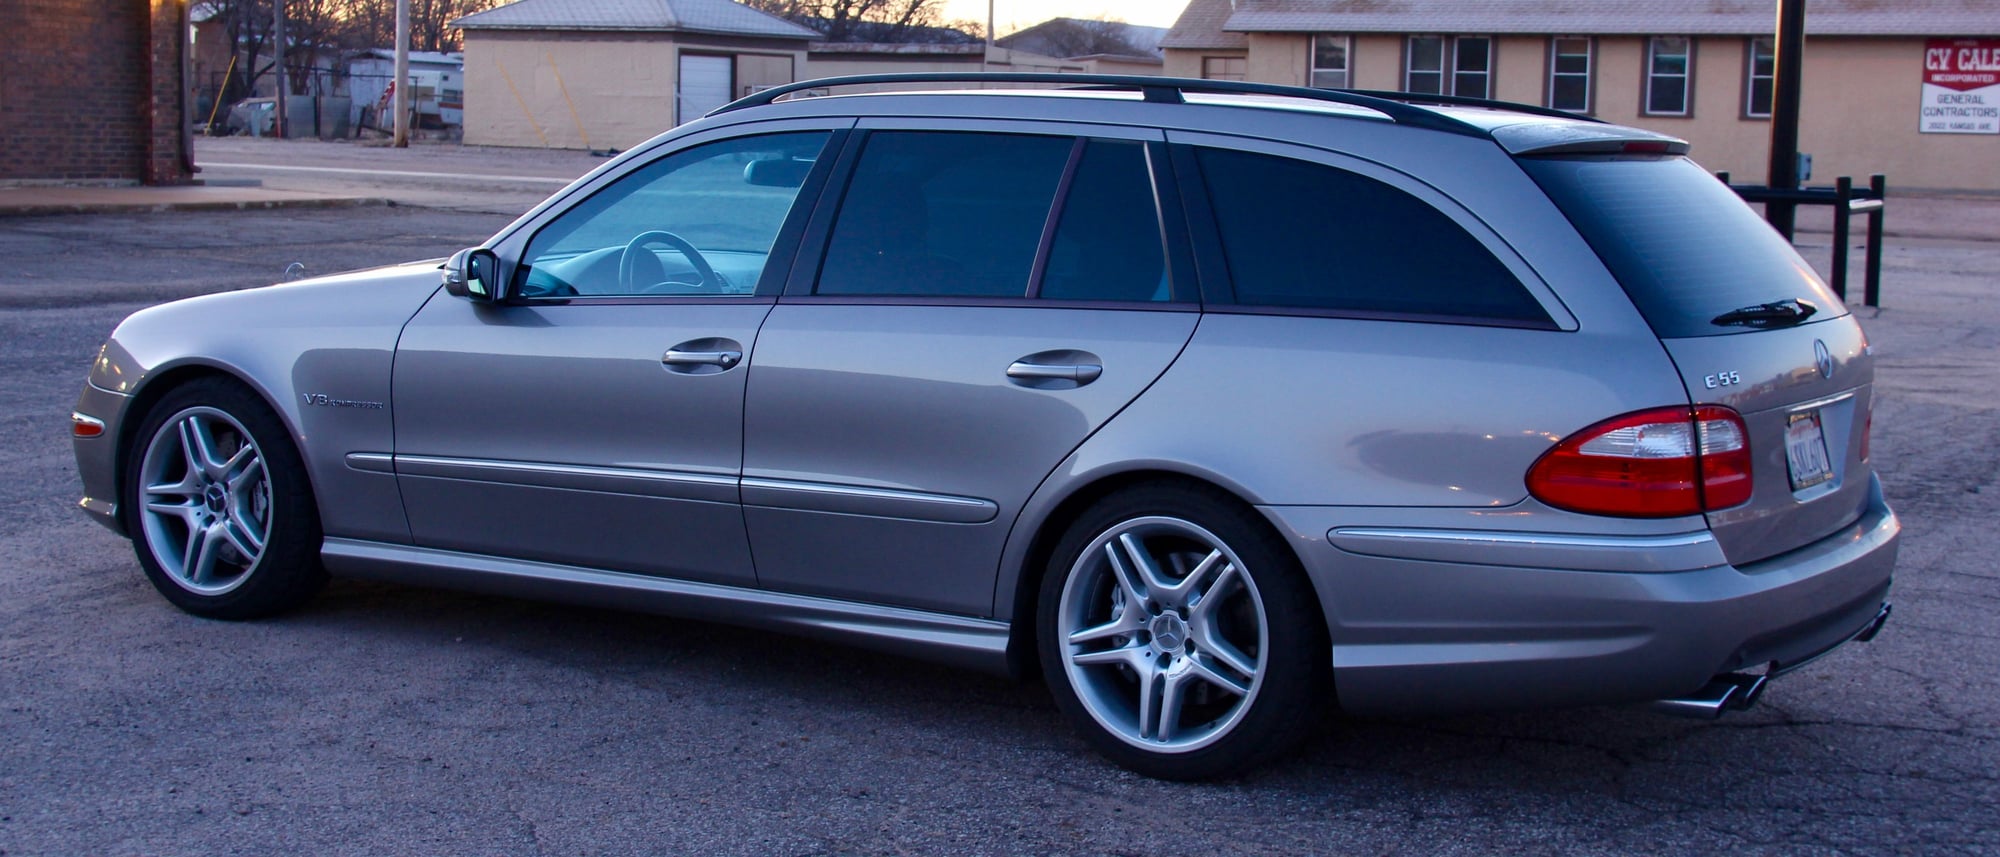 2005 Mercedes-Benz E55 AMG - 2005 E55 Wagon 90k Miles - Used - VIN WDBUH76J95A793768 - 90,500 Miles - 8 cyl - 2WD - Automatic - Wagon - Silver - Great Bend, KS 67530, United States